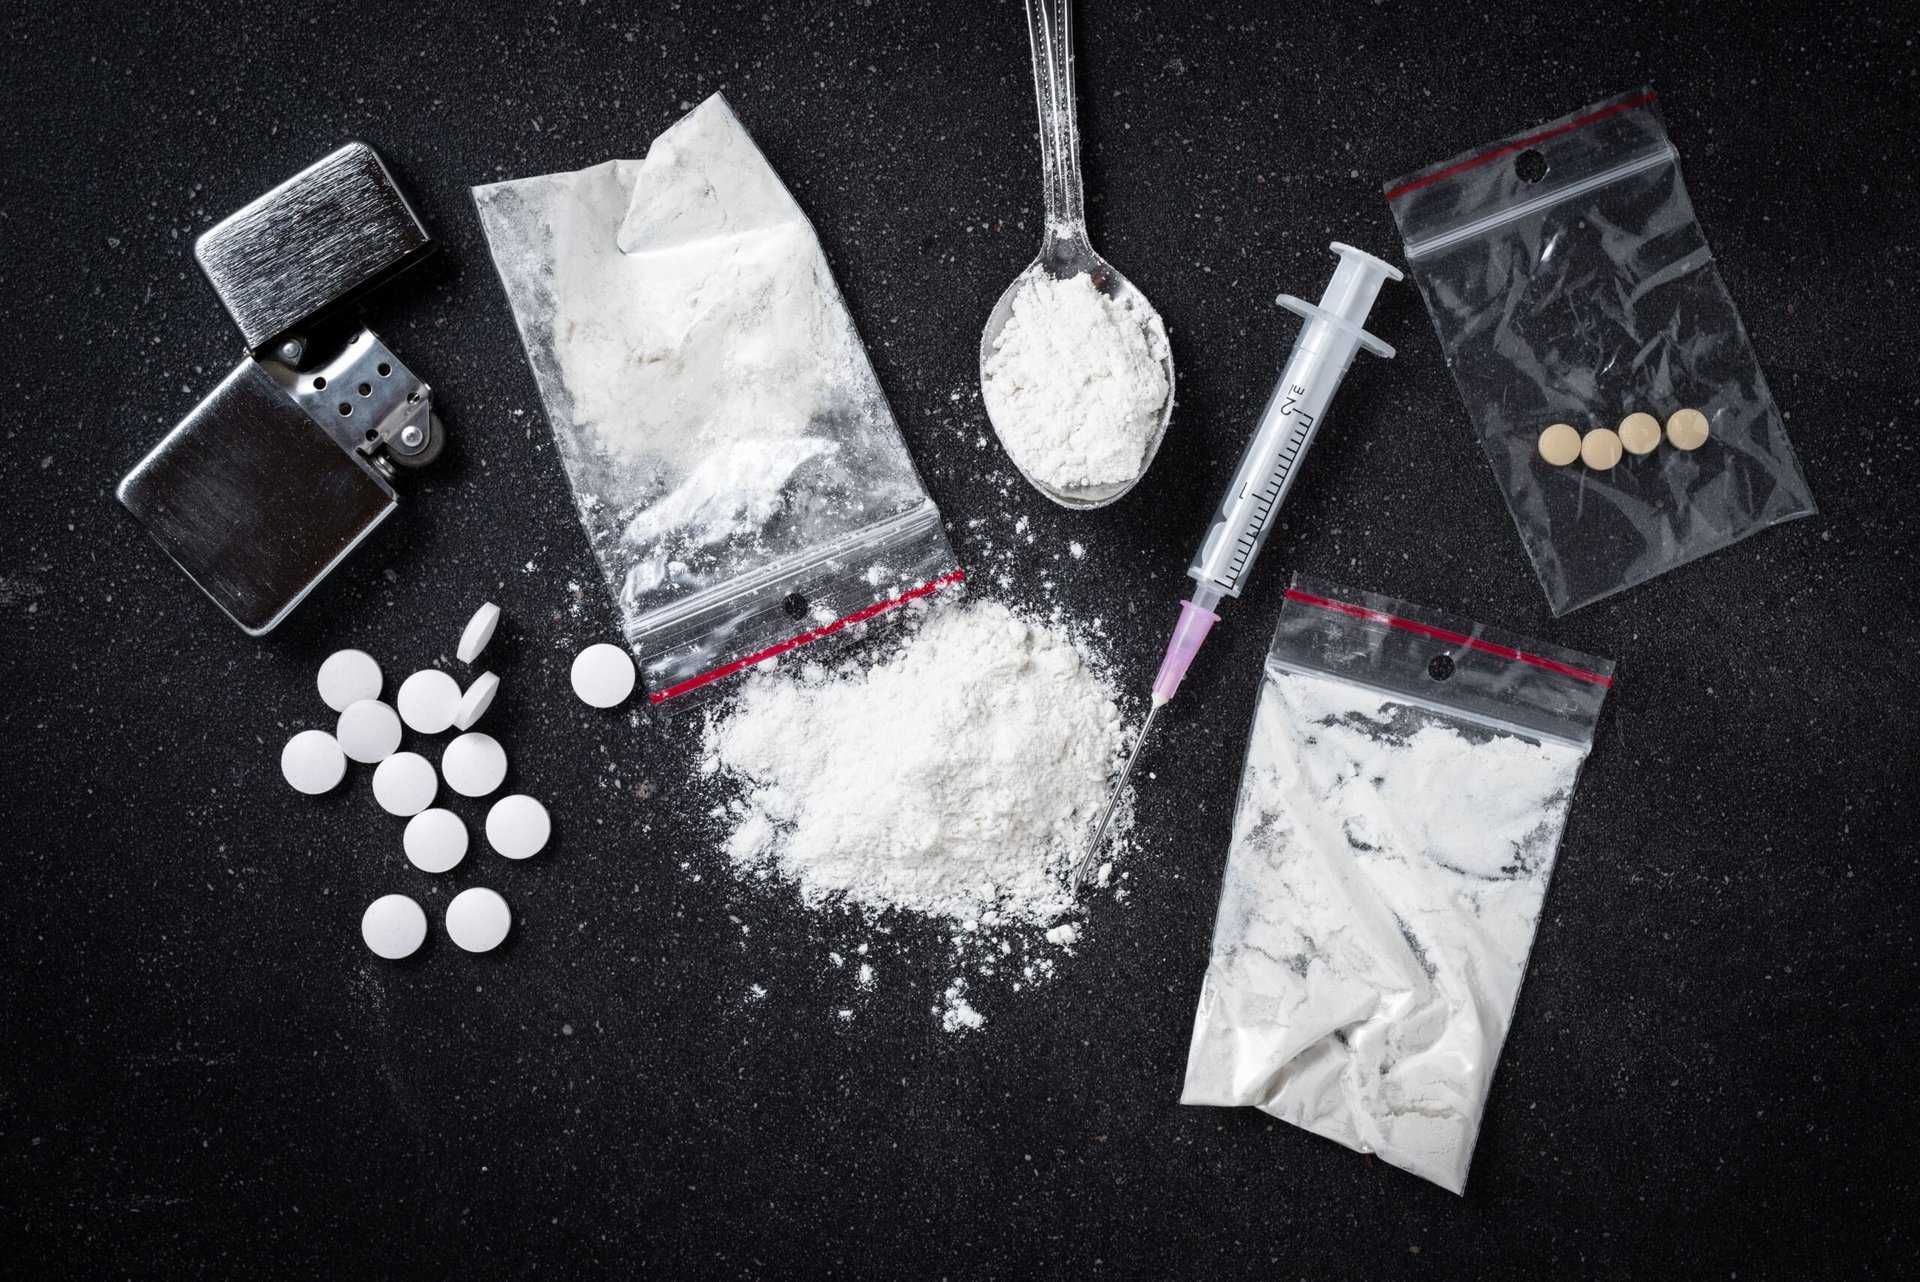 a picture of cocaine in various forms